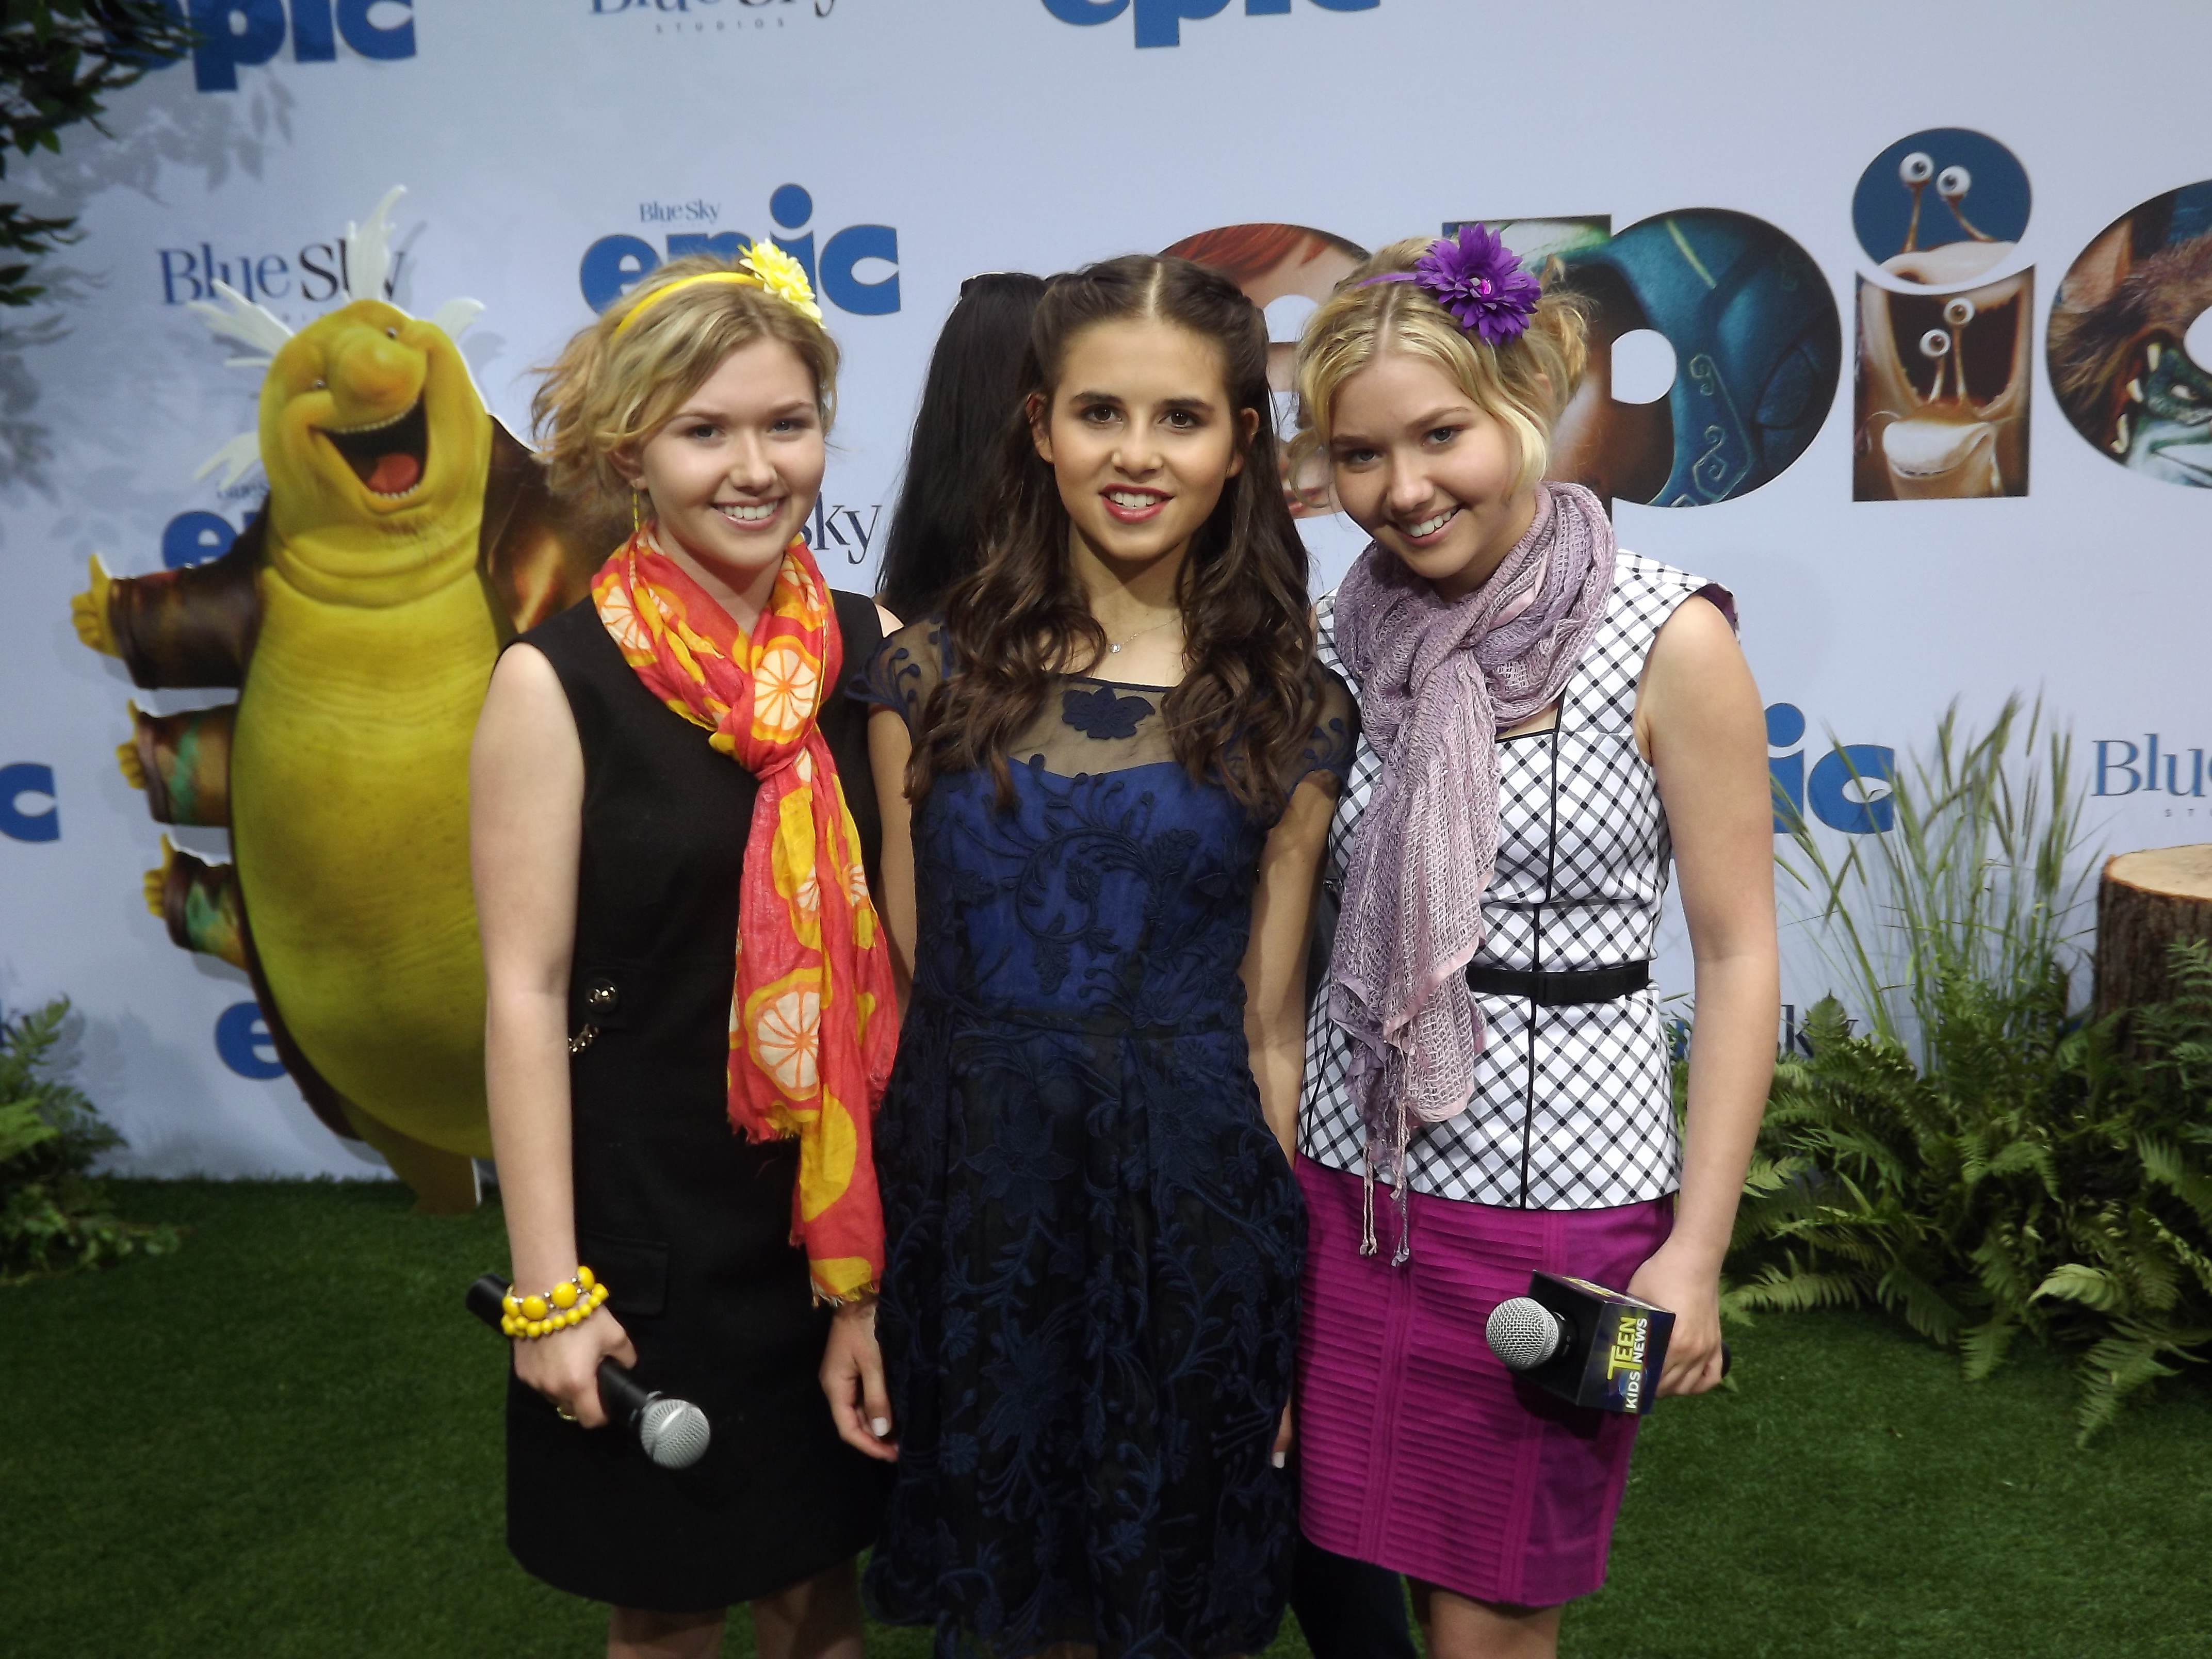 Cailin Loesch (right) and sister Hannah Loesch (left) at the NYC premiere of Epic with singer Carly Rose Sonenclar